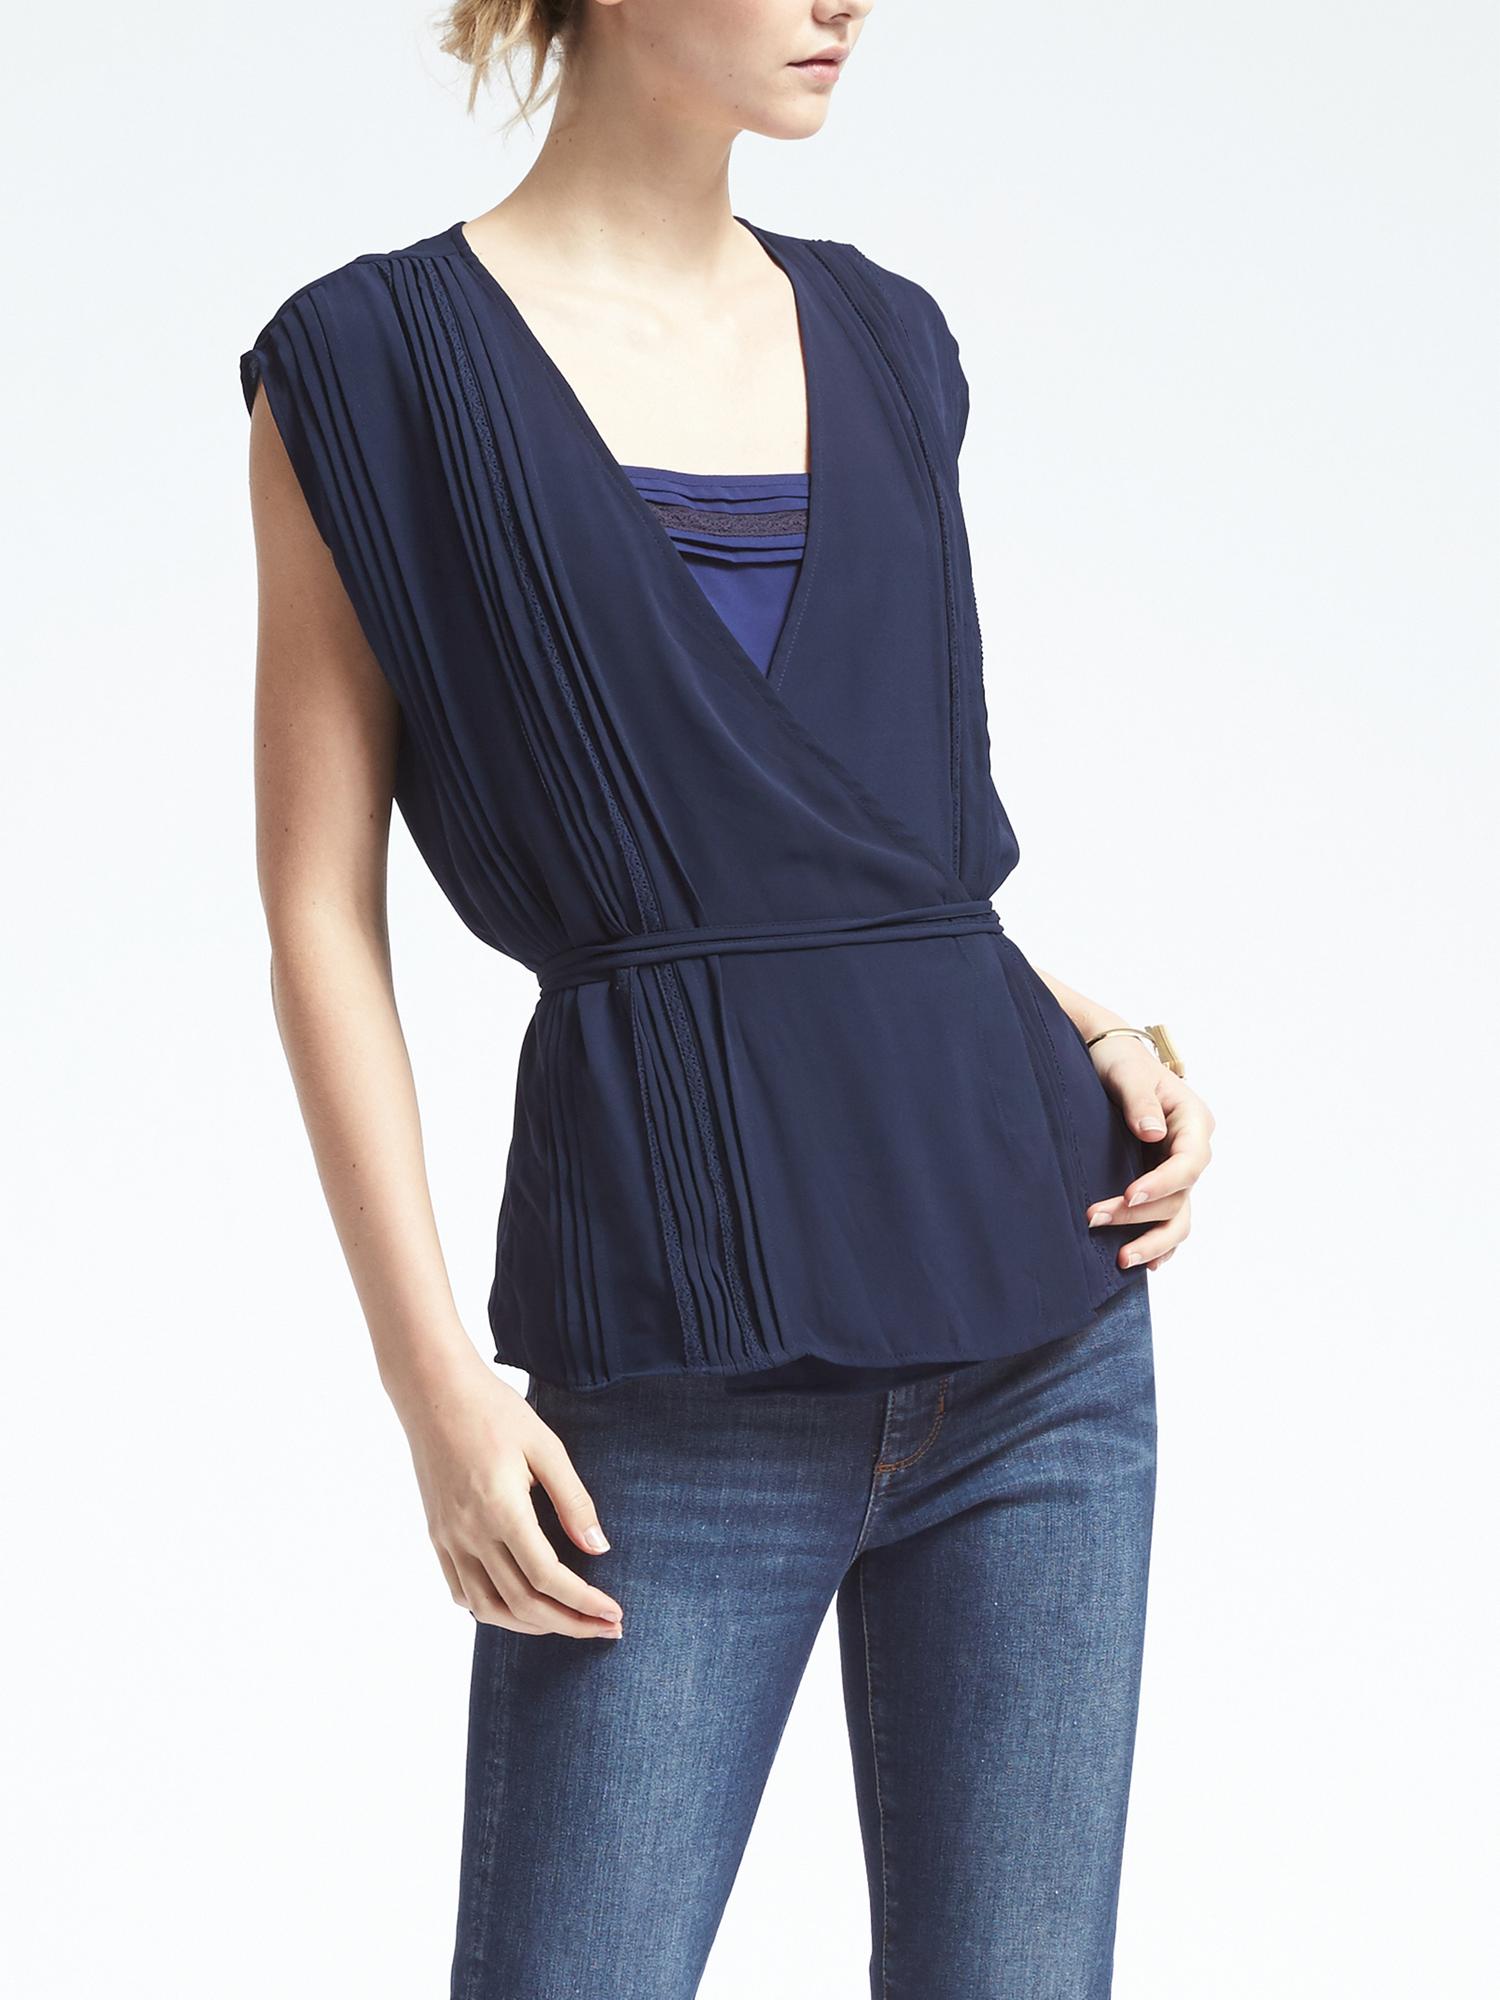 Easy Care Lace-Trim Wrap Top